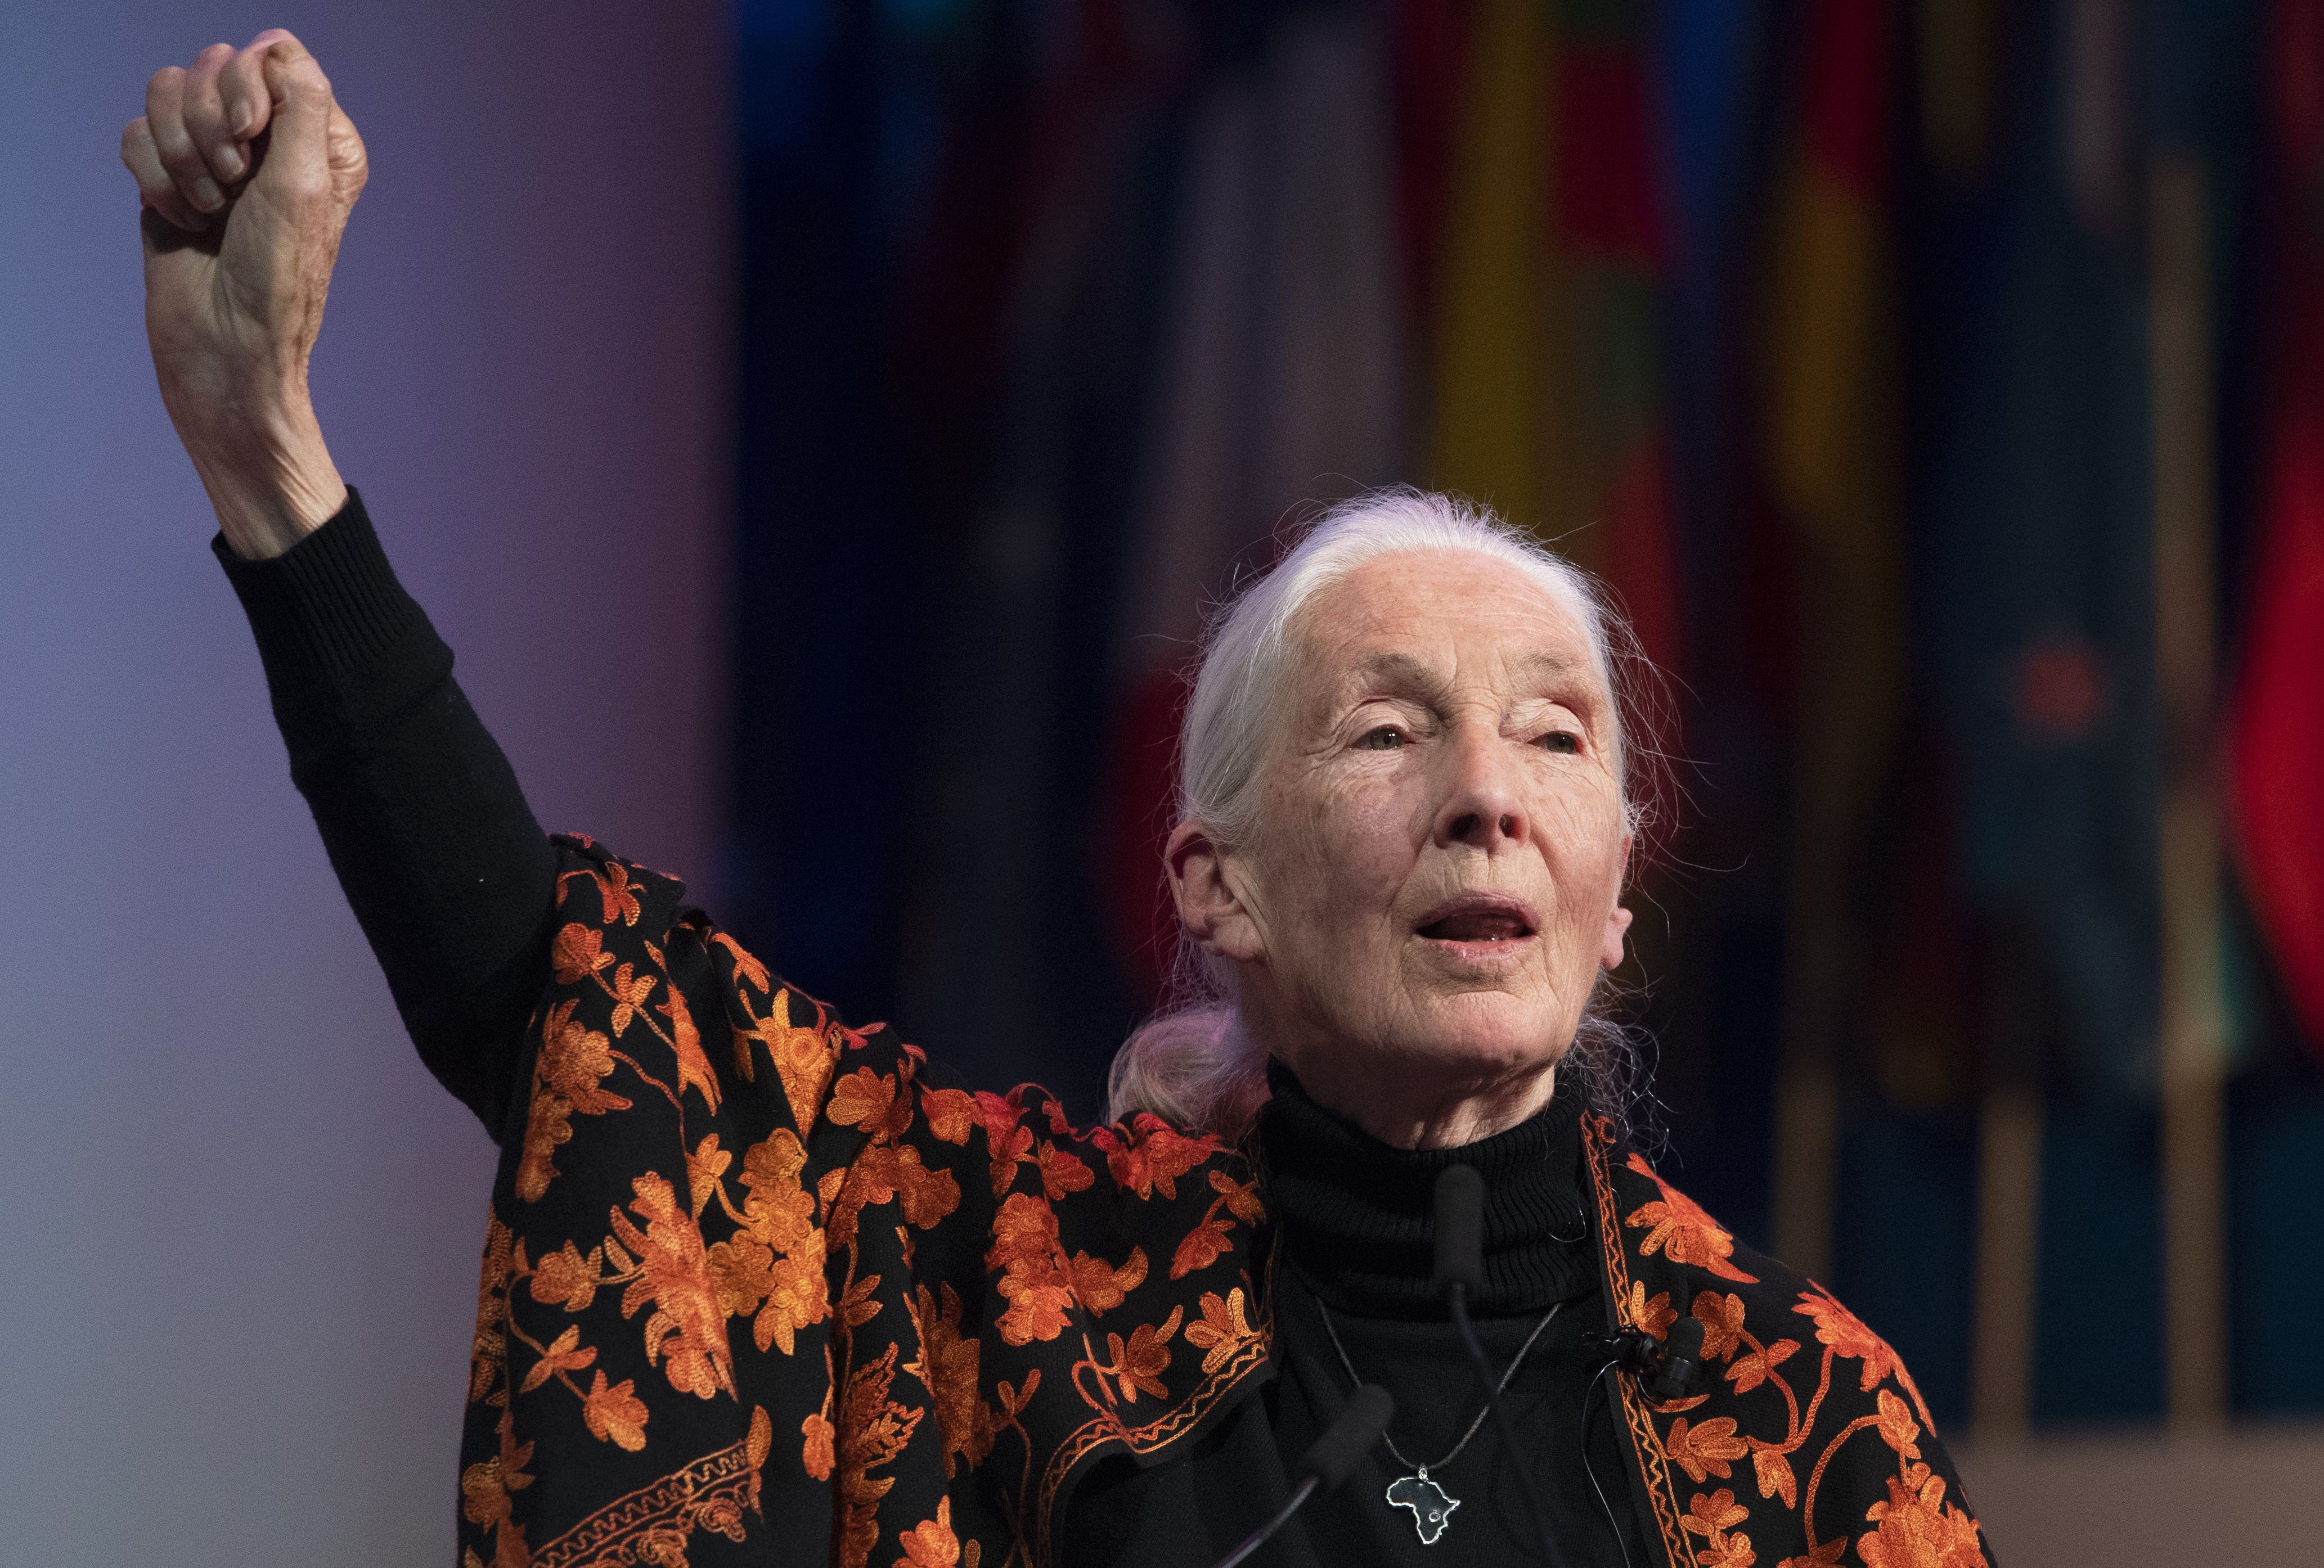 Anthropologist and UN messenger of Peace, Dr. Jane Goodall speaks during a session at the One Young World Summit in the Methodist Hall in London, Britain, 23 October 2019. 